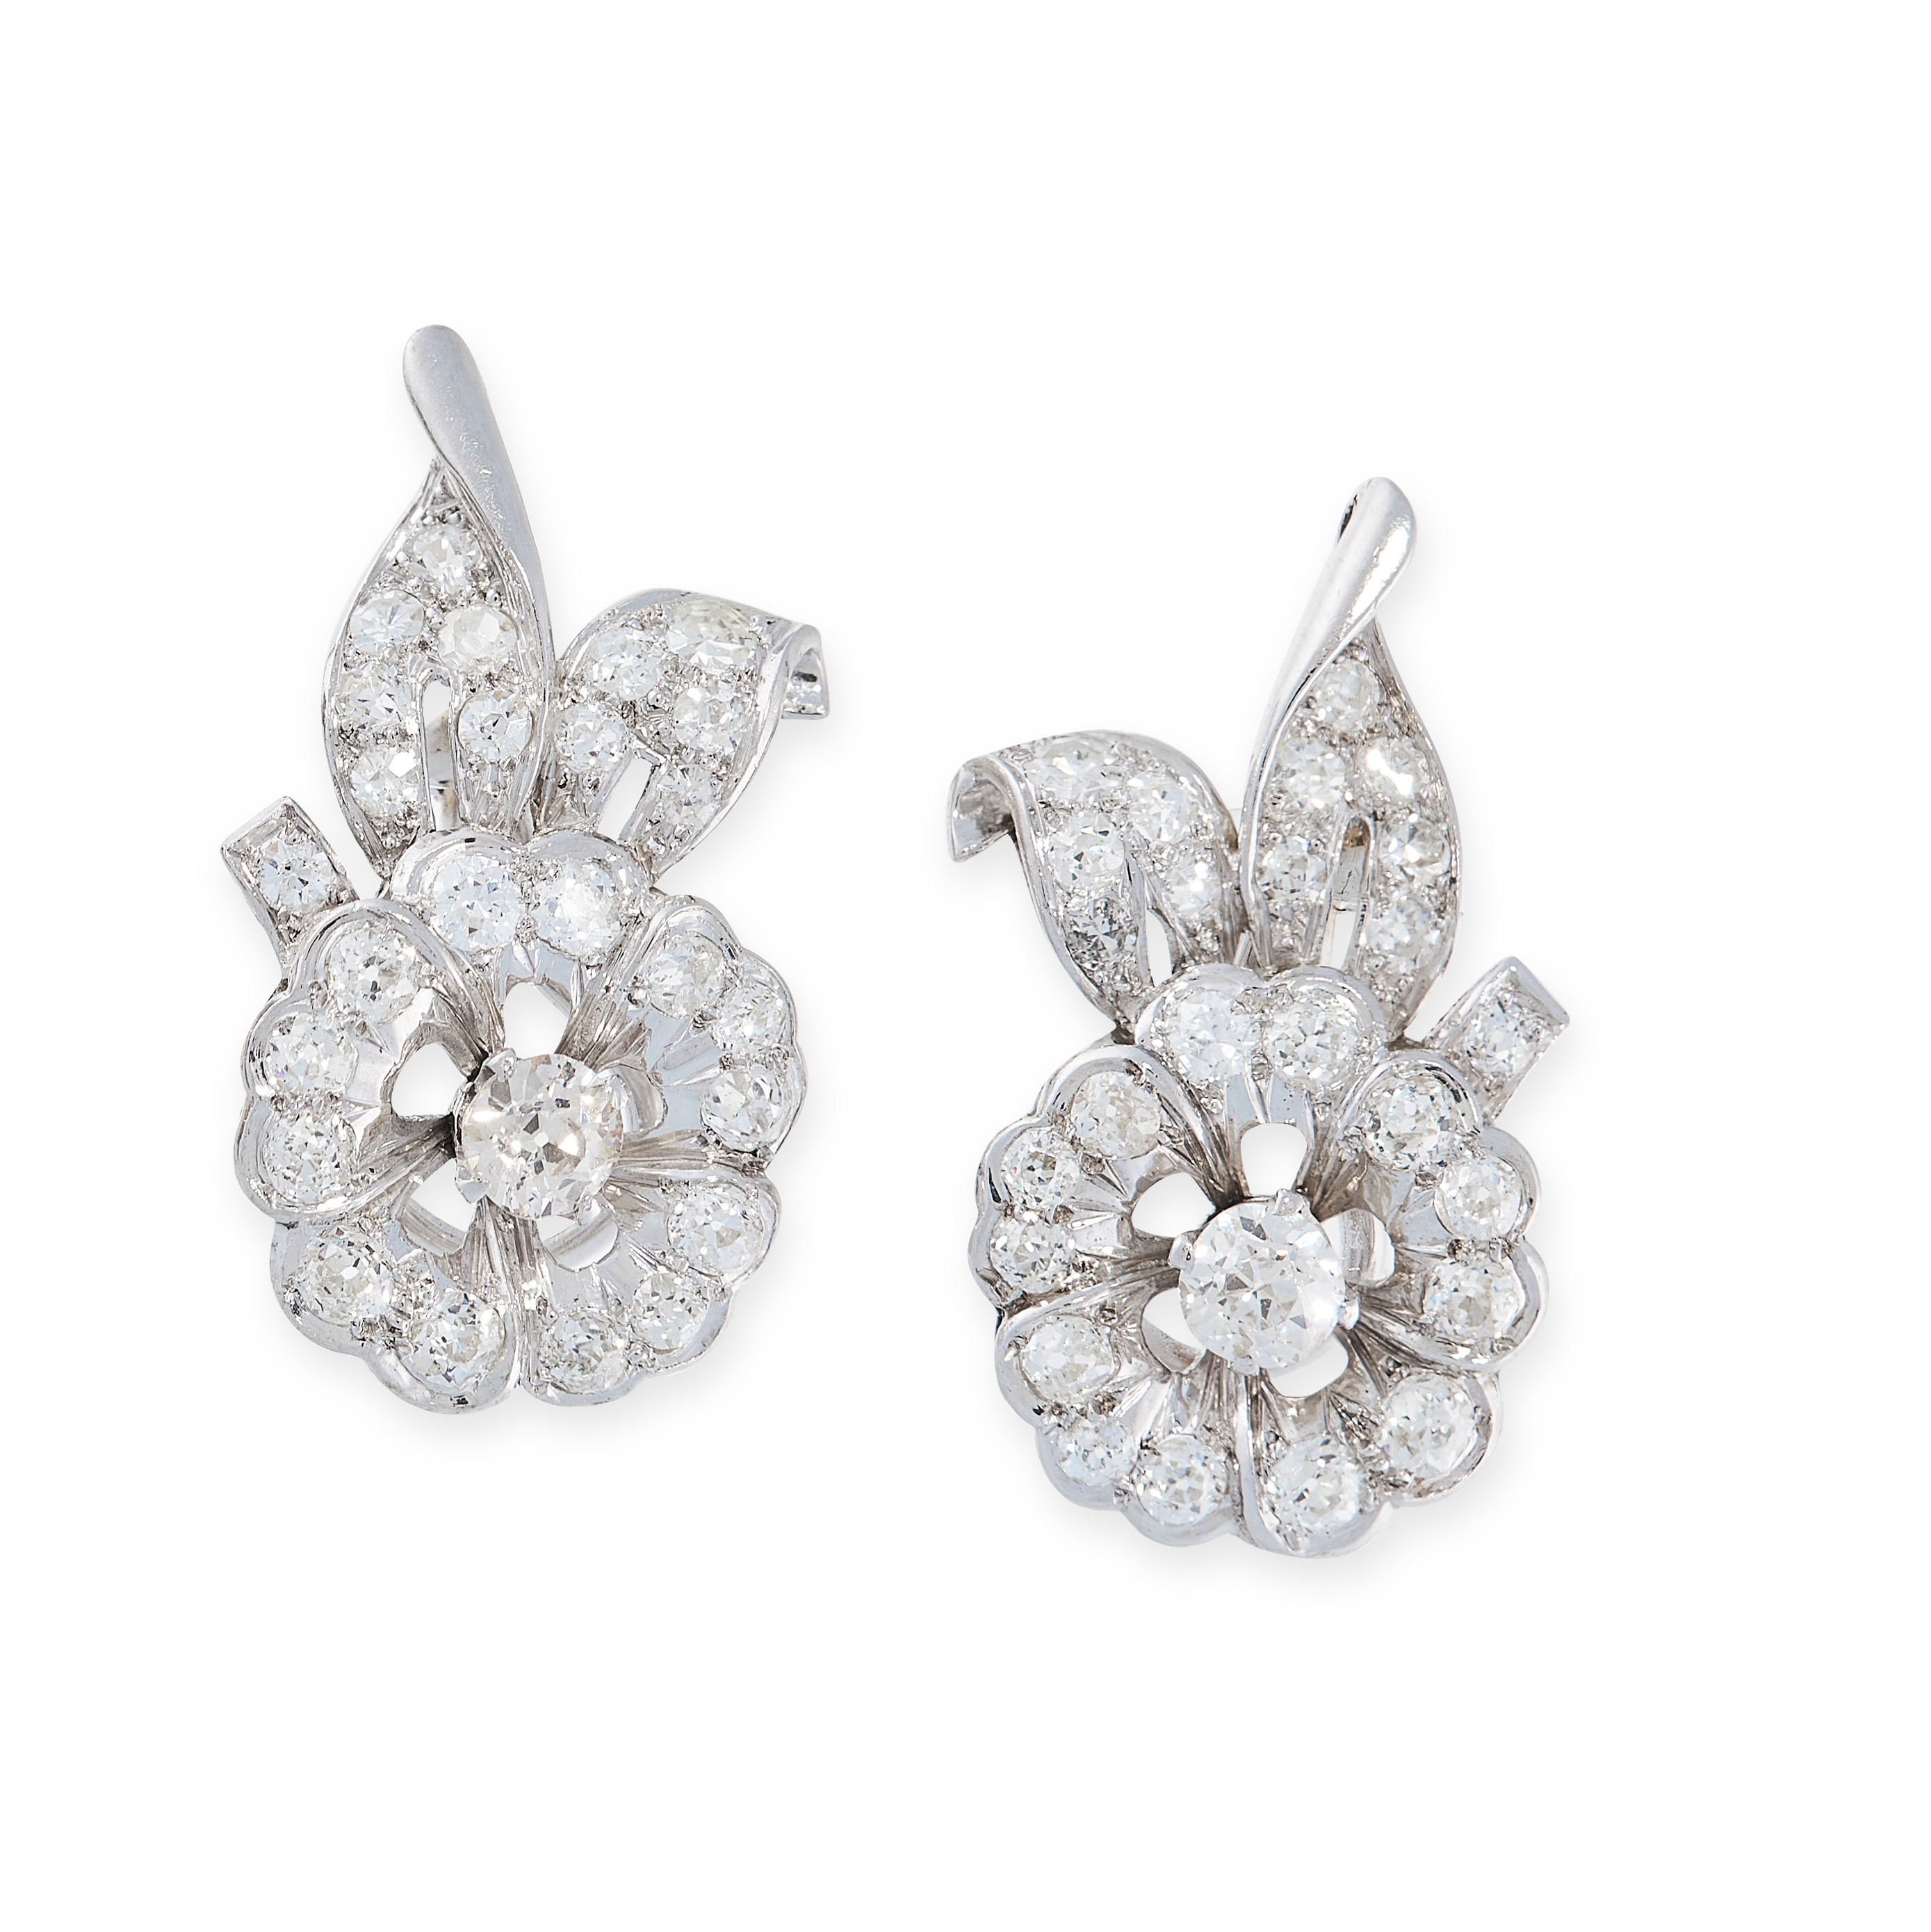 A PAIR OF VINTAGE DIAMOND CLIP EARRINGS each designed as a flower, set throughout with old cut and